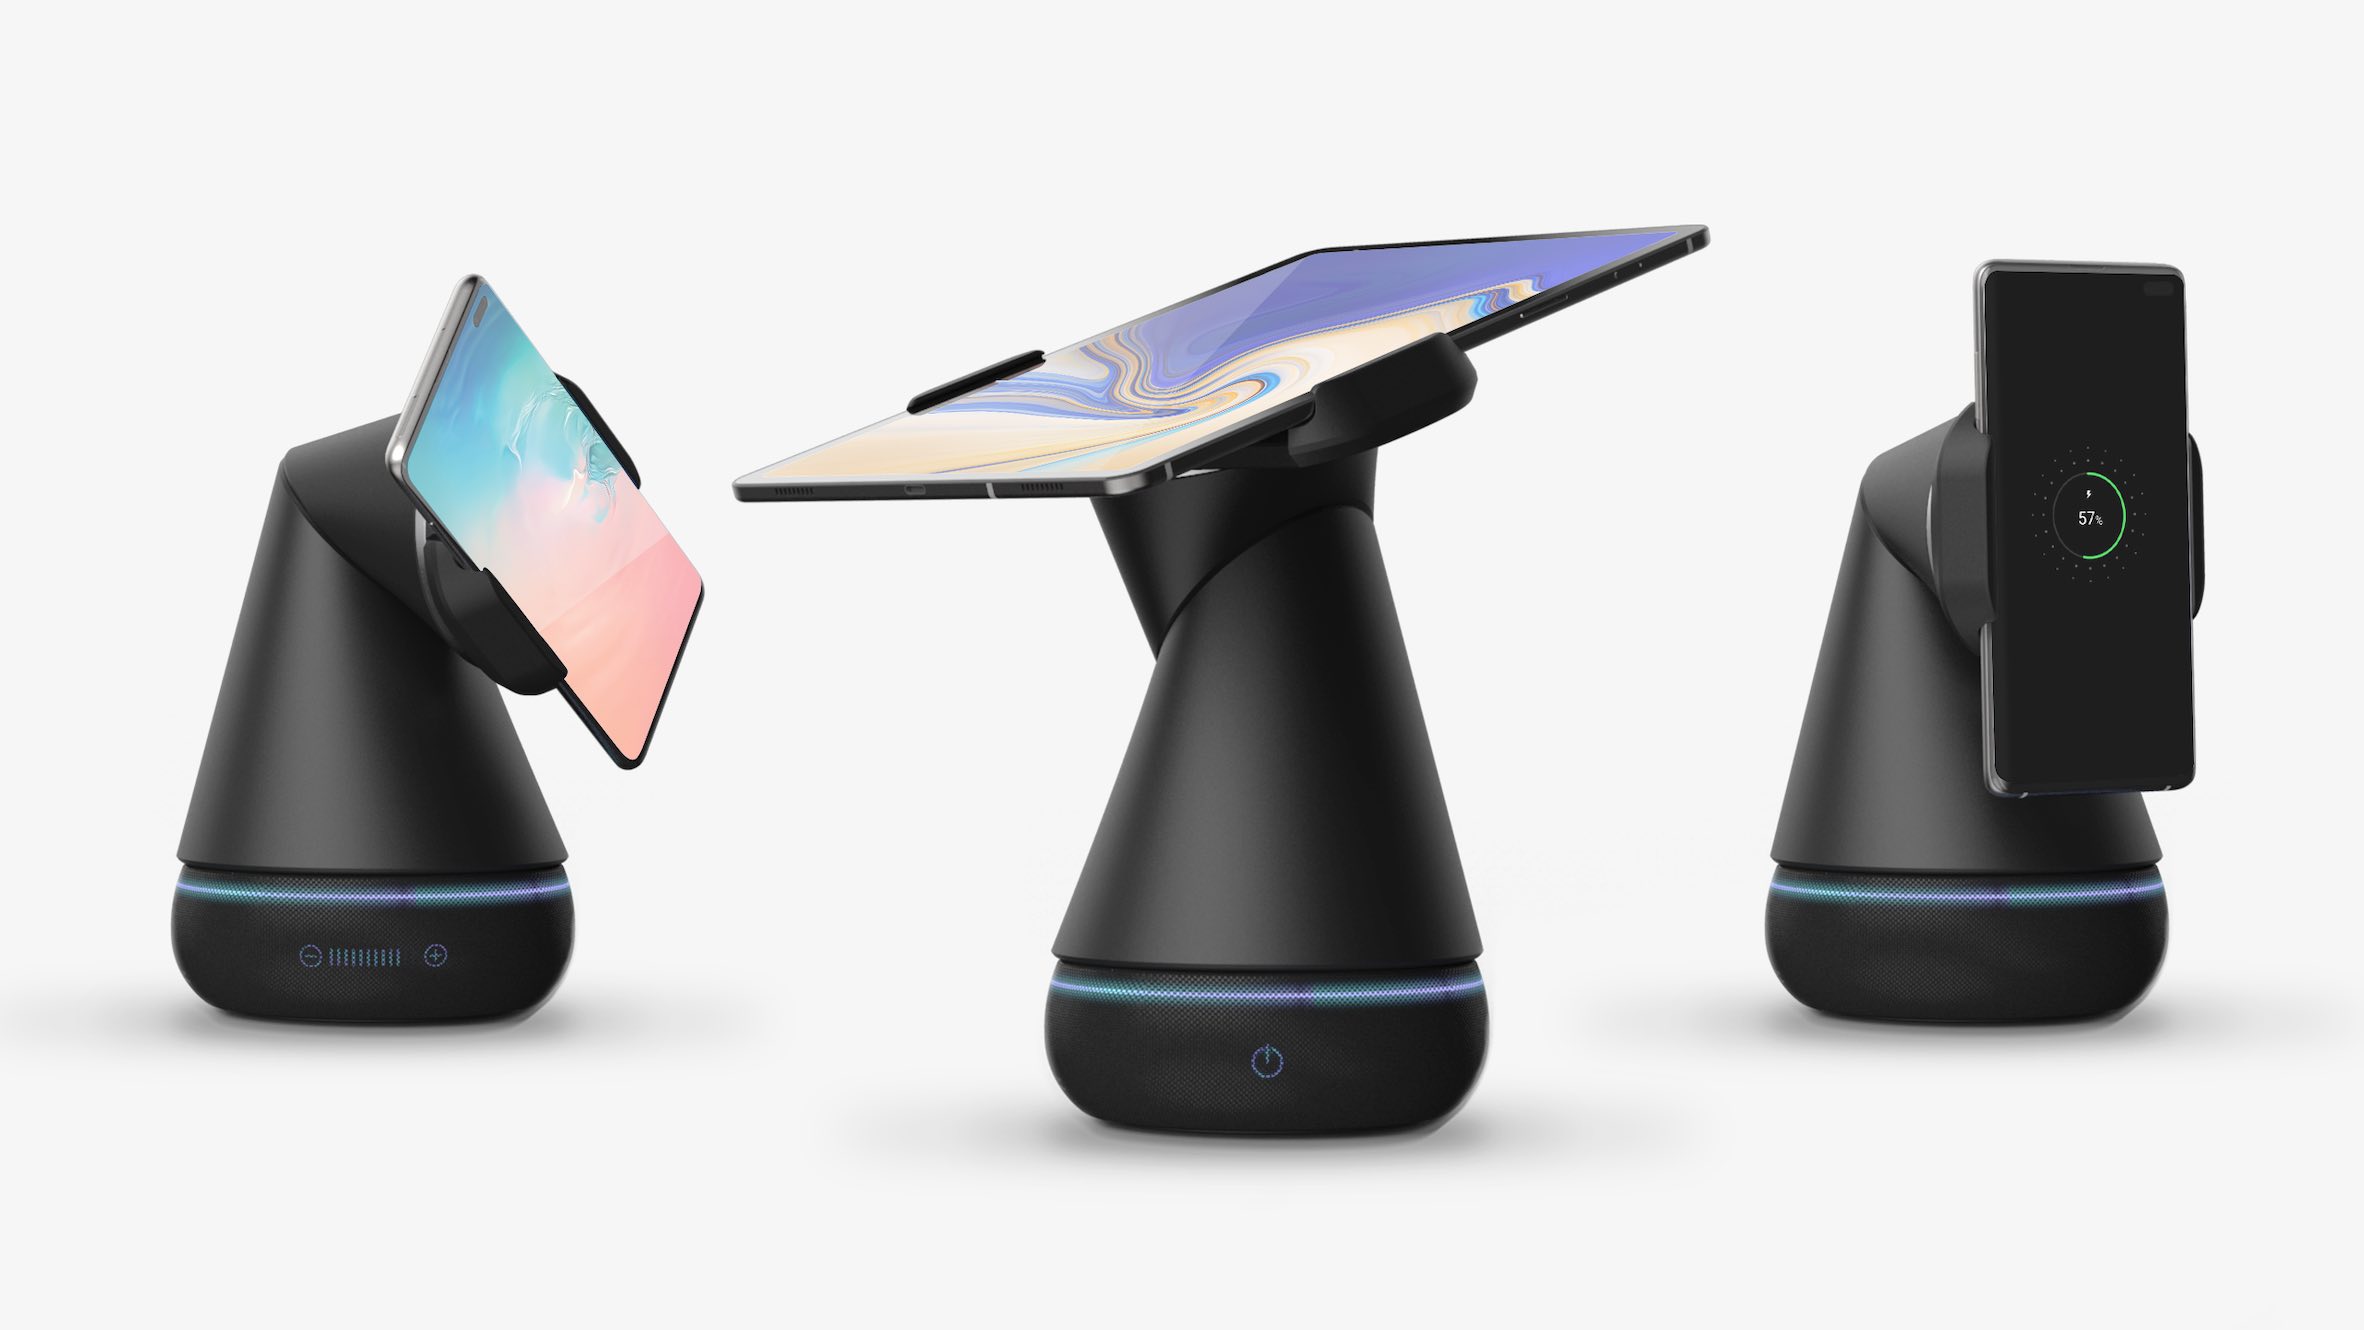 Star by Andre Gouveia for the Samsung Design Competition 2019